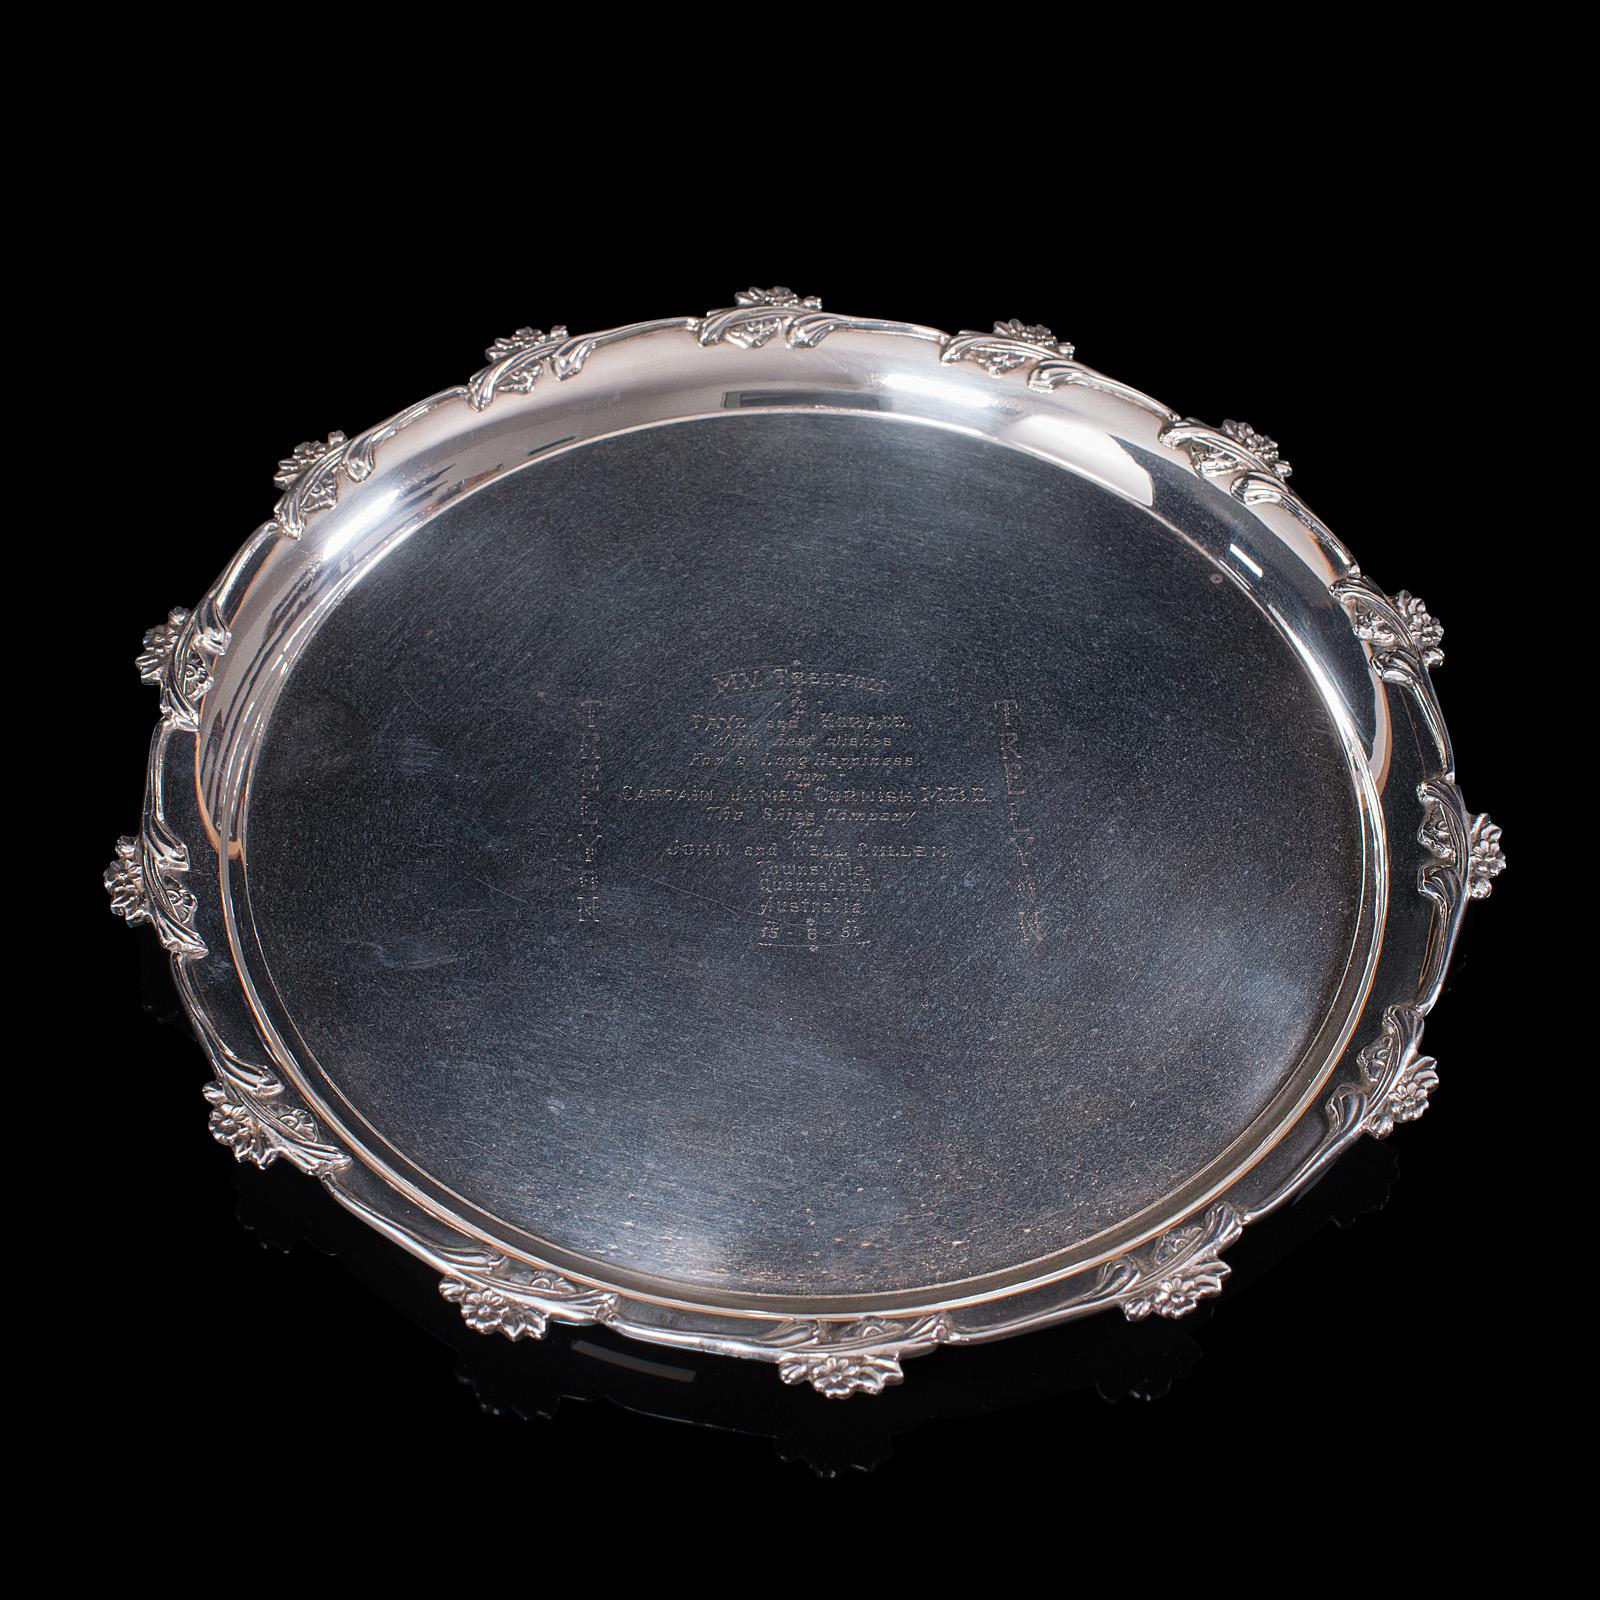 This is a vintage maritime commemorative salver. An English, silver plated display tray with personal inscription and Merchant Navy interest, dating to mid 20th century, circa 1950.

Unusual and fascinating engraving ideal for those with maritime